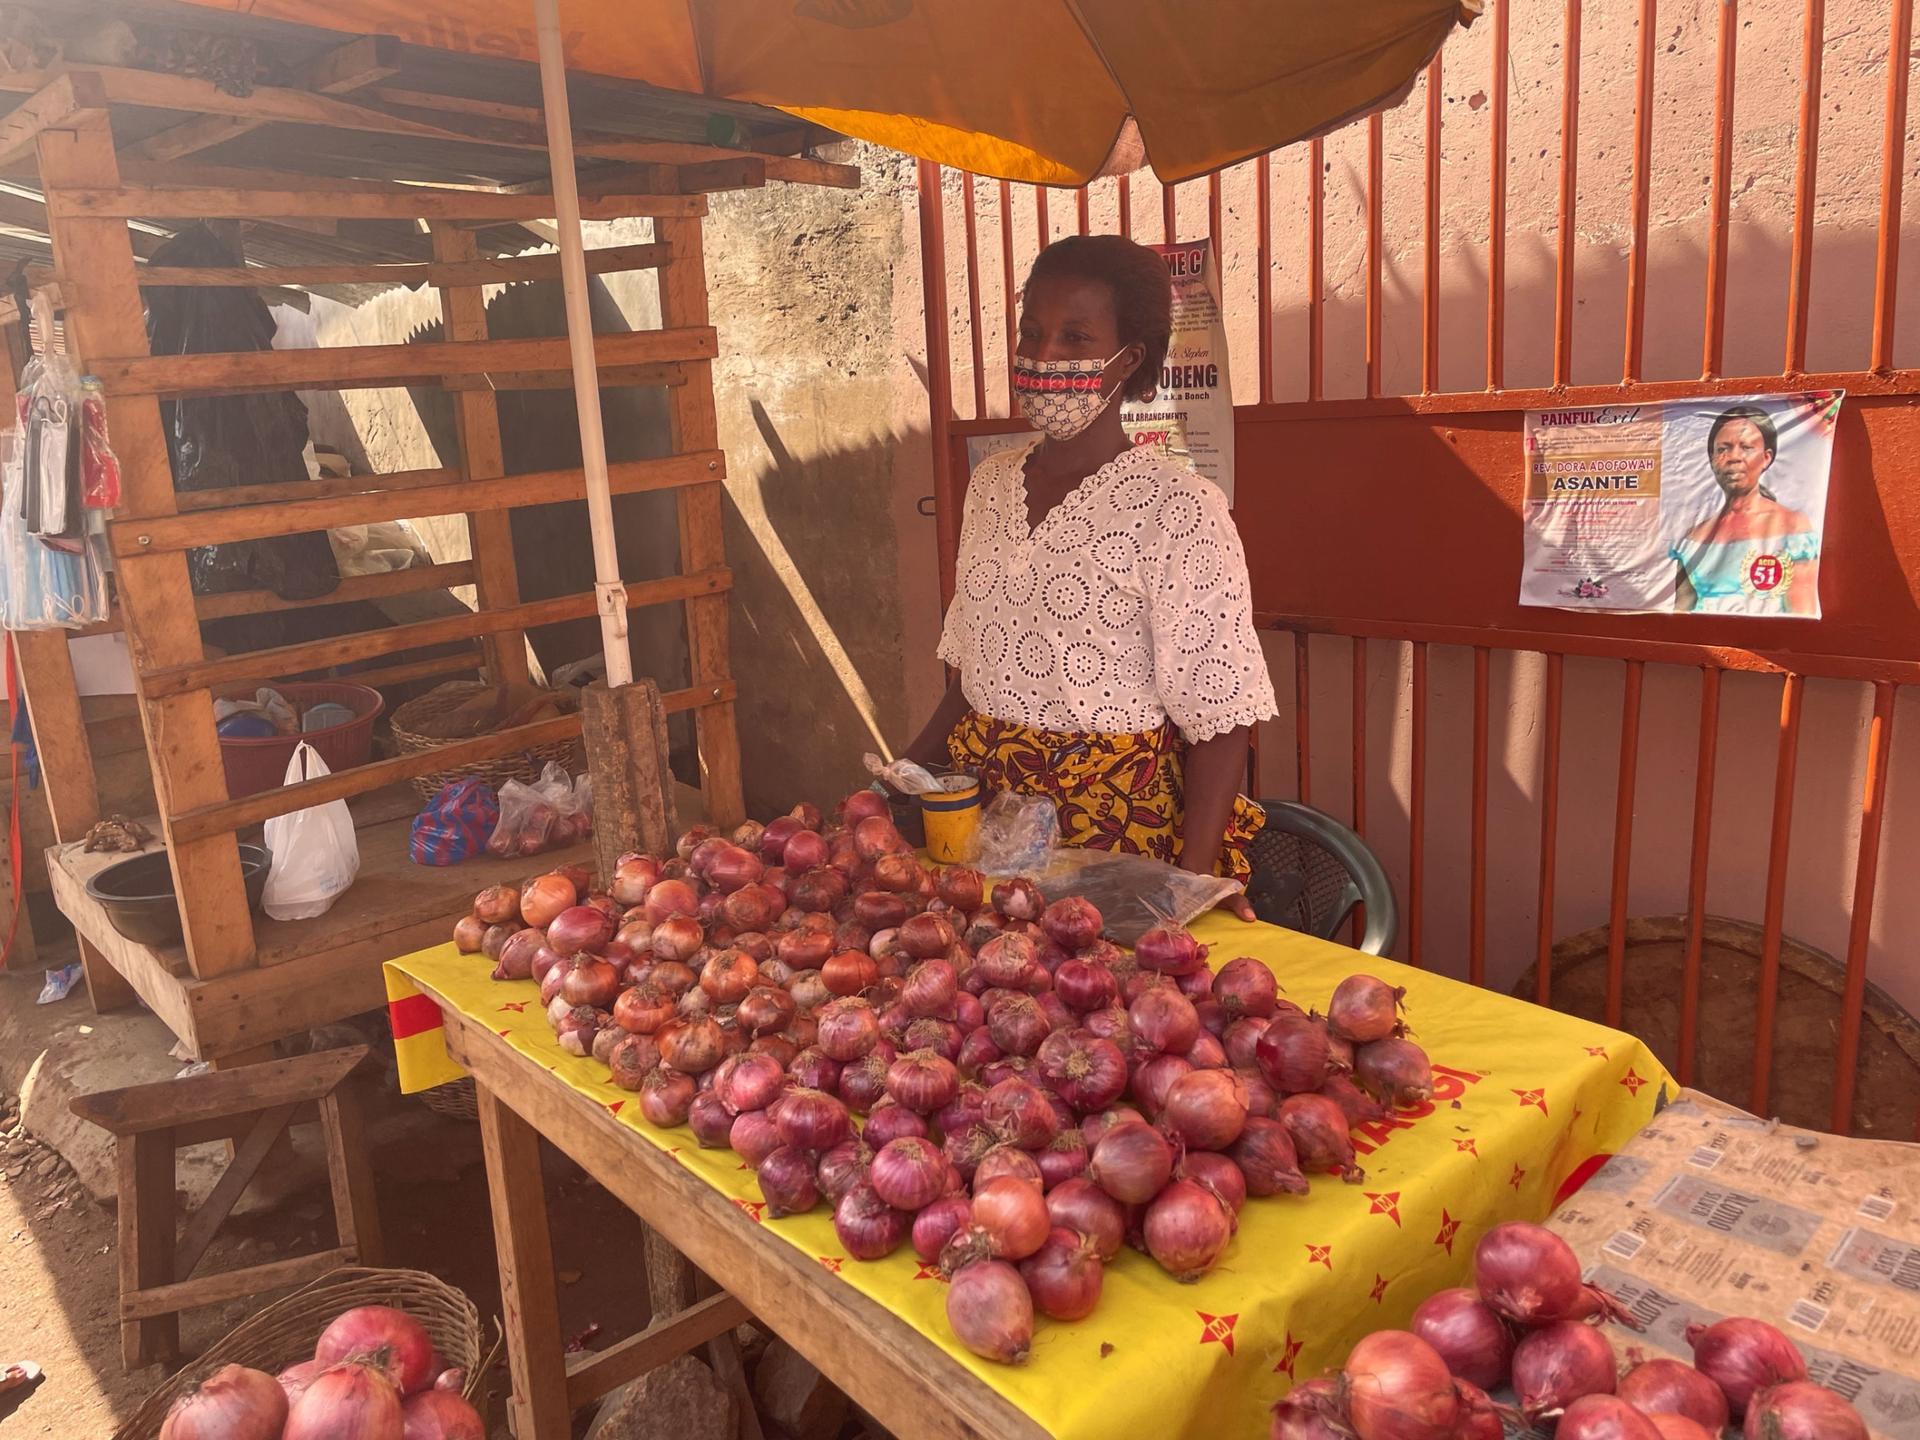 Adwoa Boadu fears changing weather could collapse her onion business.